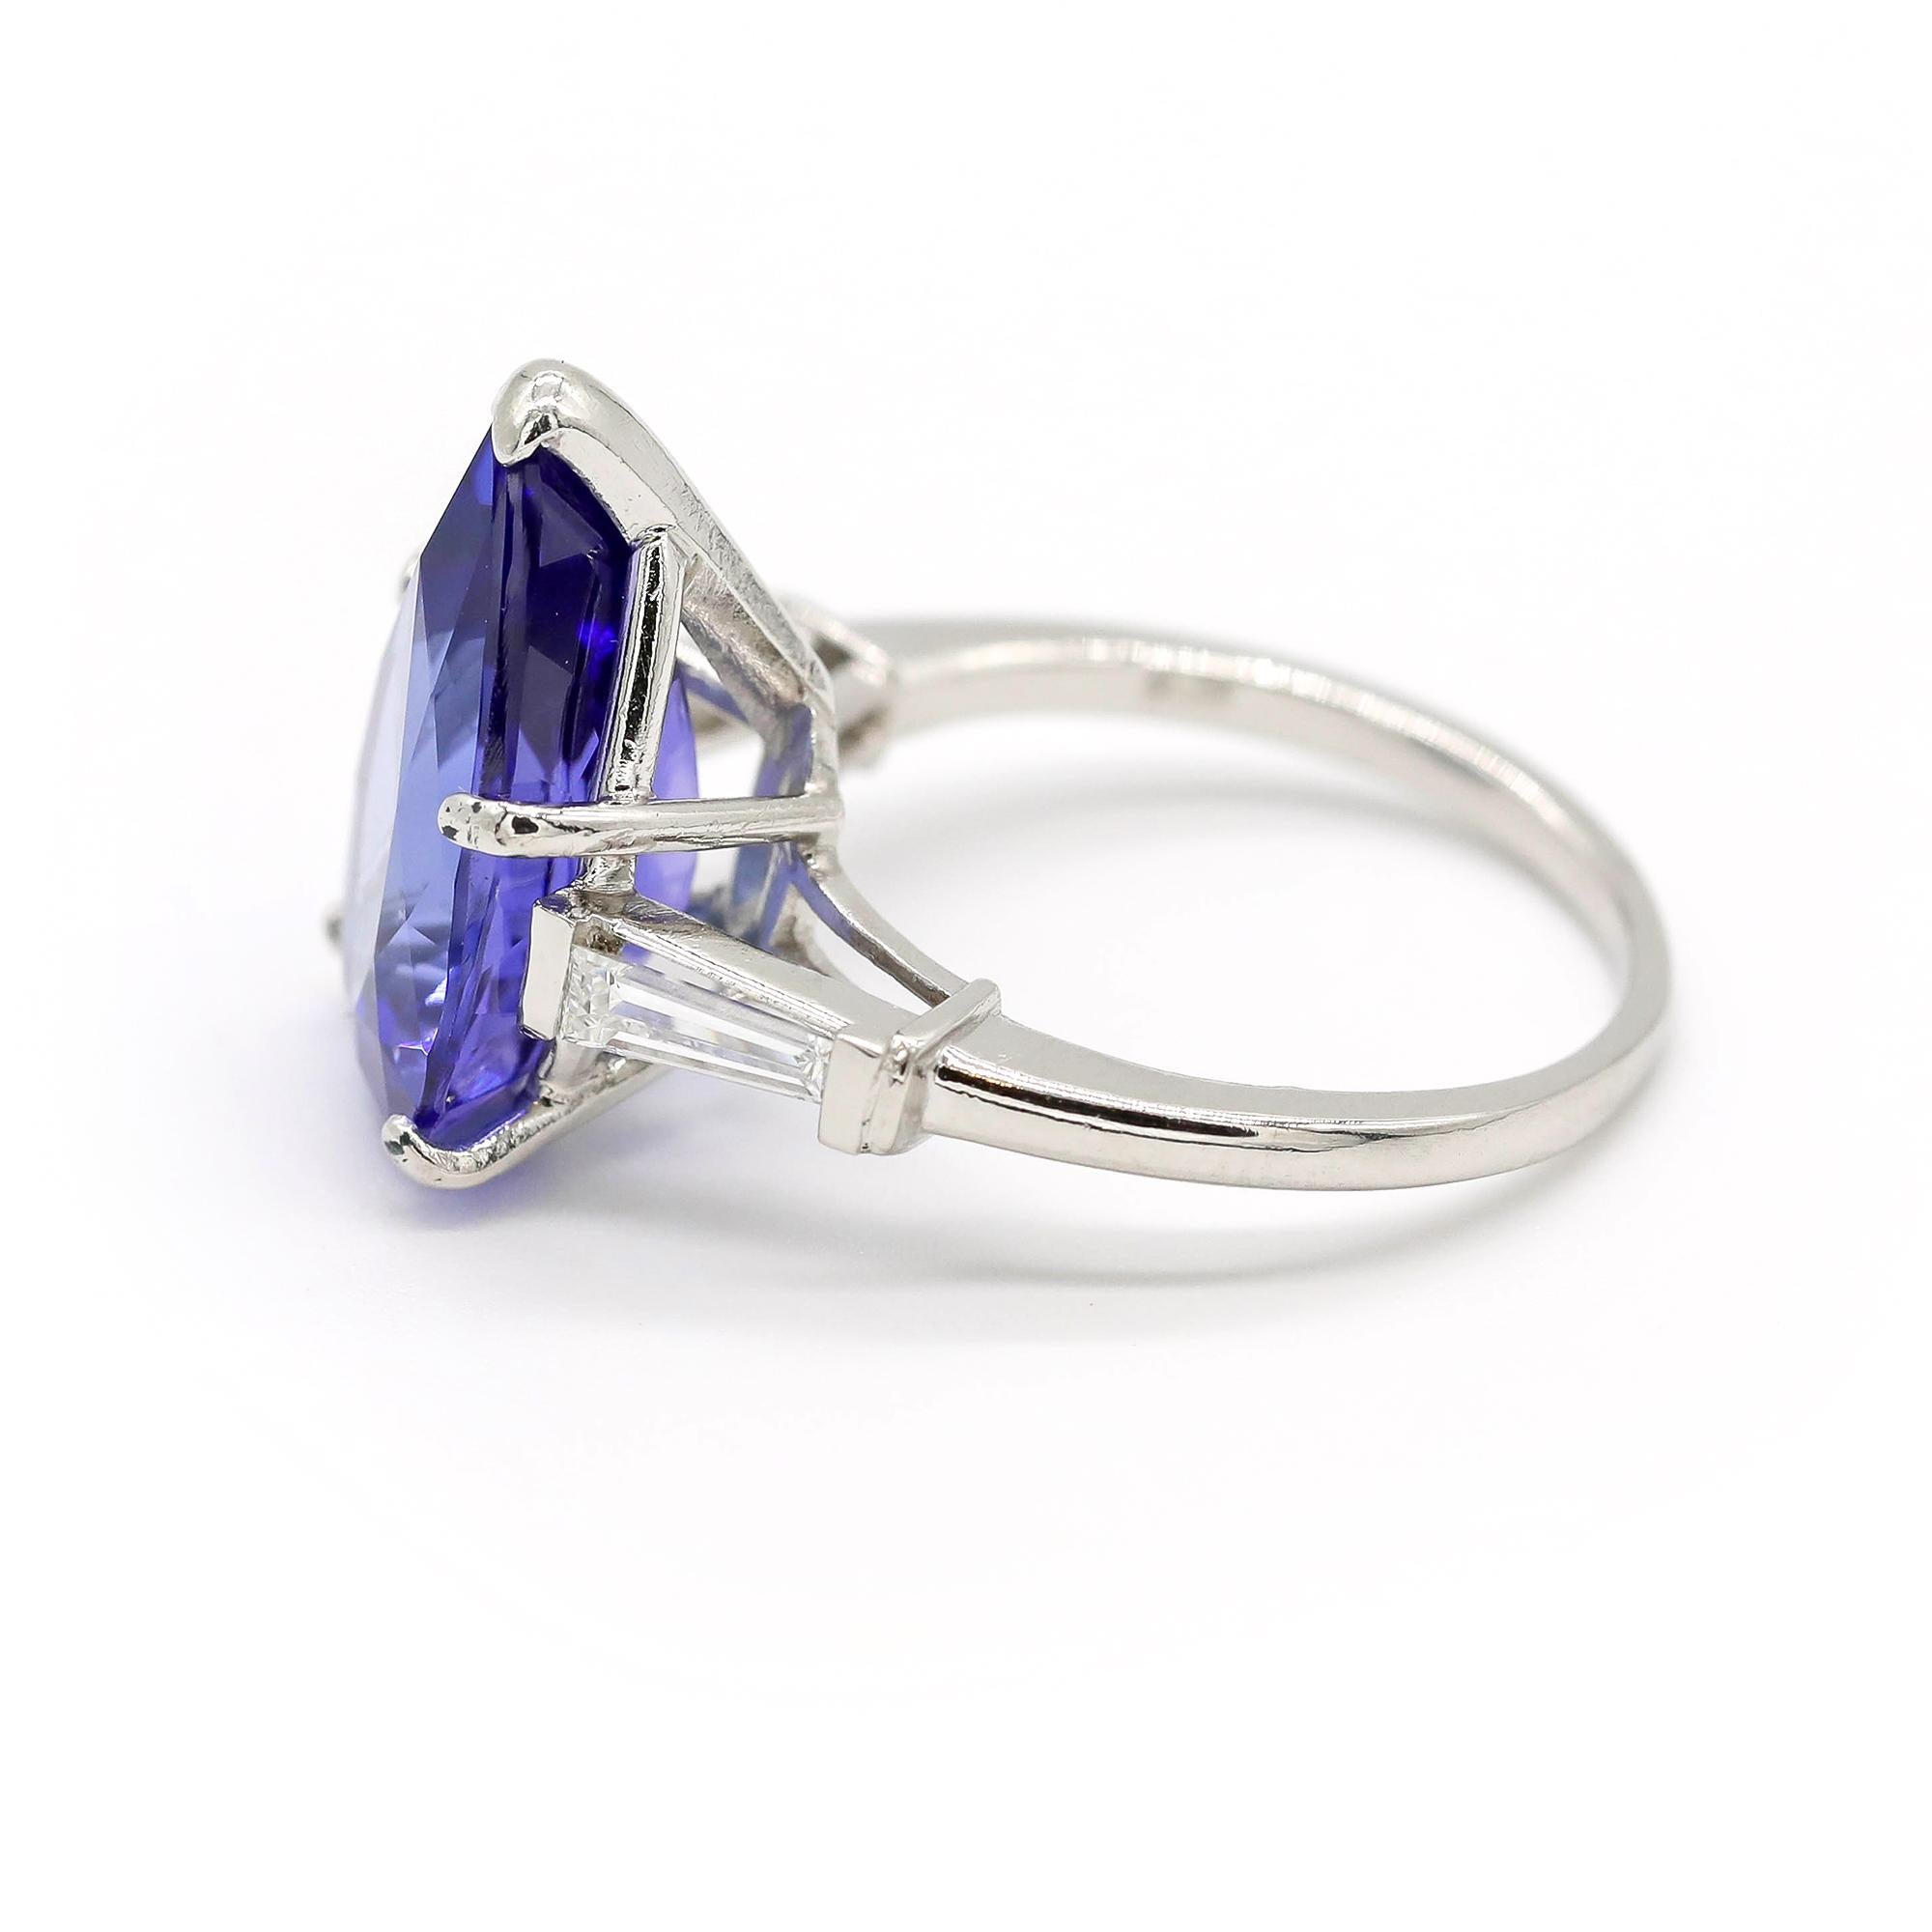 Pear-Cut 7 CTW Tanzanite 0.30Ct Diamond Engagement Solitaire Ring Platinum

Crafted in Platinum, this Unique design showcases Tanzanite designs, set in a Pear Shape mesmerizing baguette diamonds, Polished to a brilliant shine.

We guarantee all